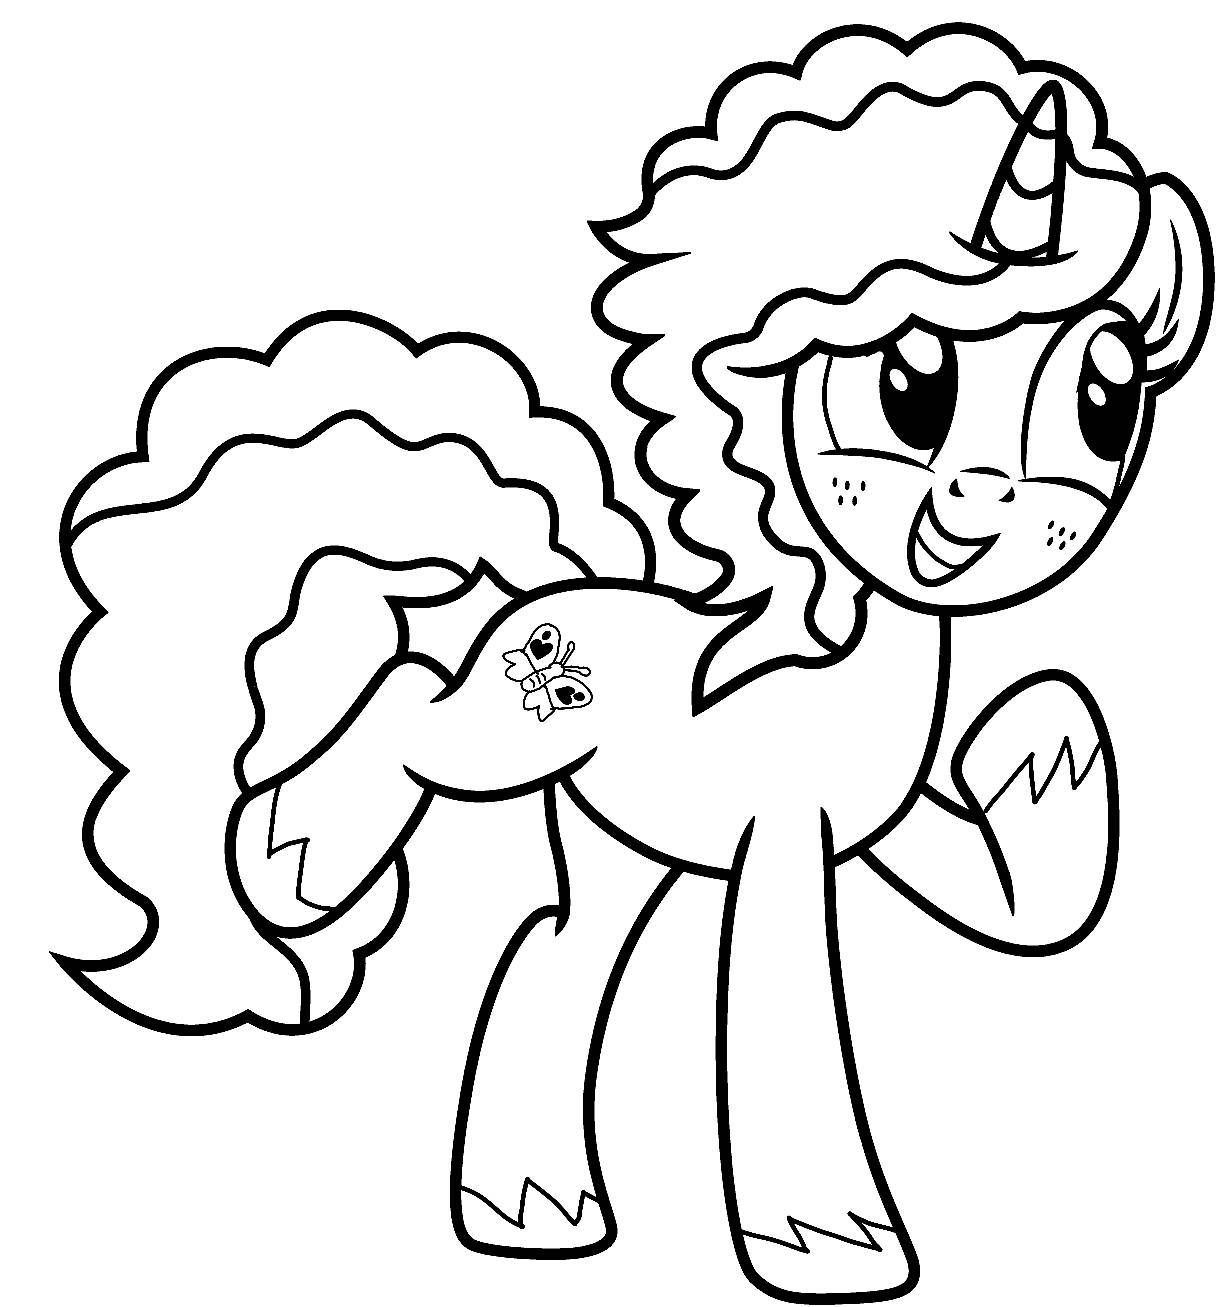 Reborn misty brightdawn coloring page by mistytheunicorn on